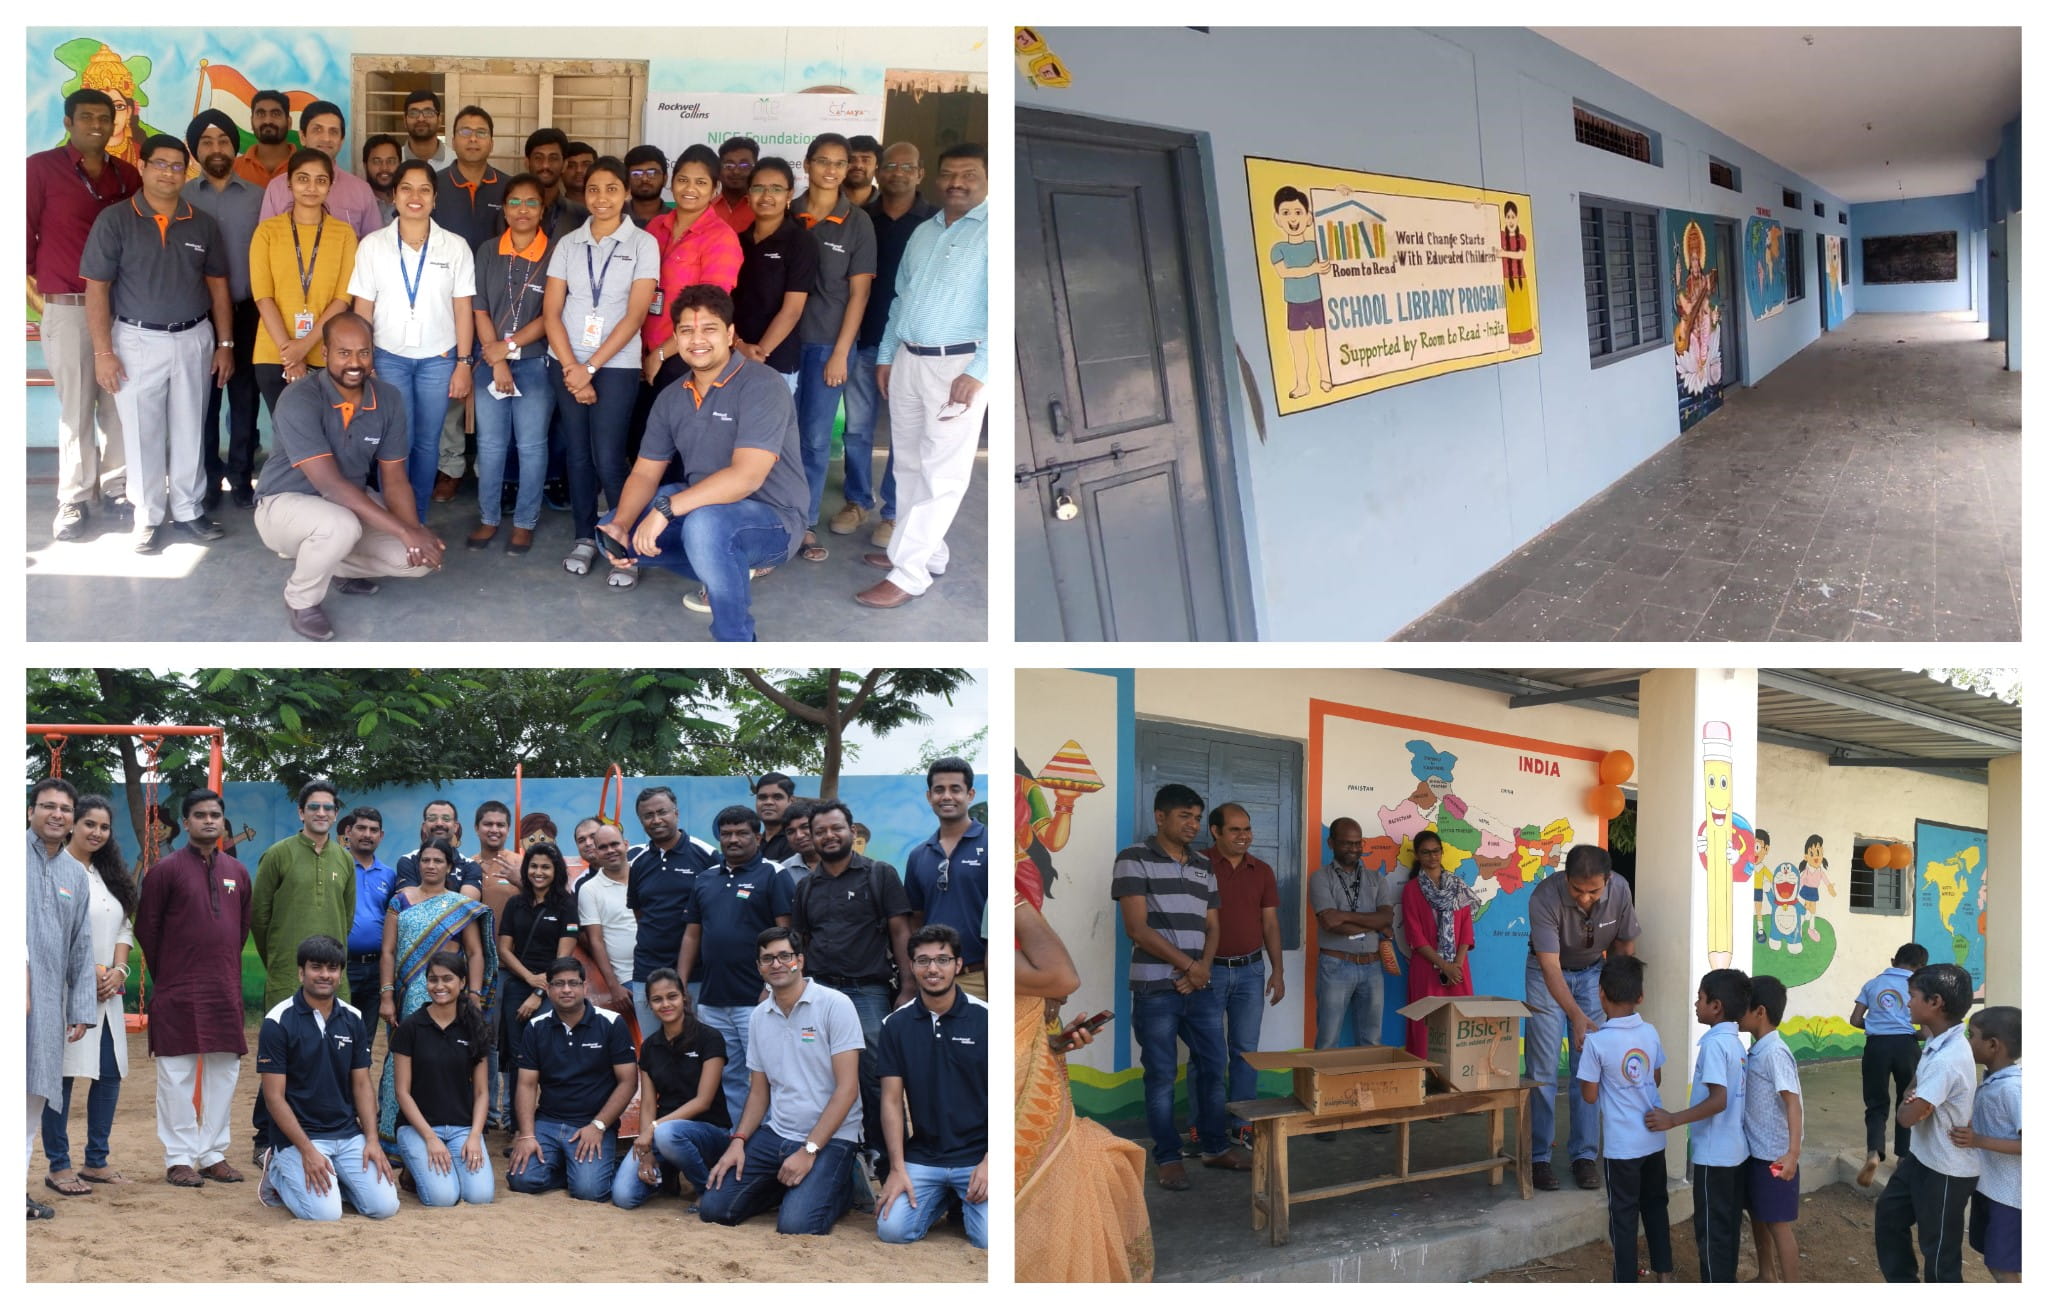 Collage of pictures from Collins Aerospace in India's school adoption program